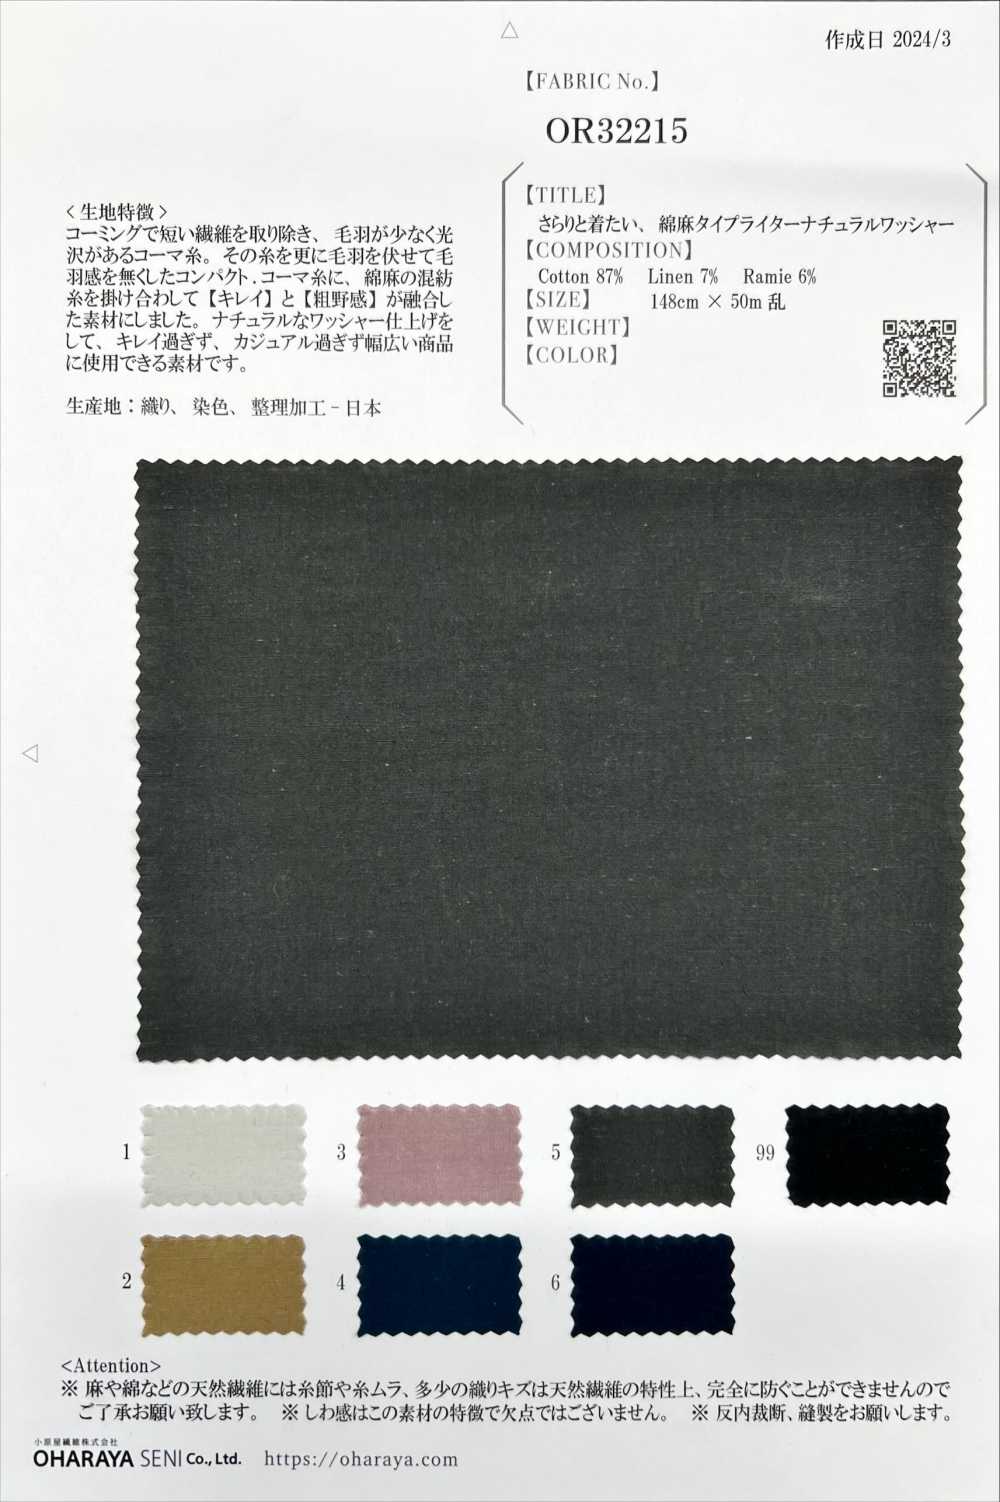 OR32215 A Linen -linen Typewritter Cloth With Natural Washing Process For A Smooth Feel[Textile / Fabric] Oharayaseni